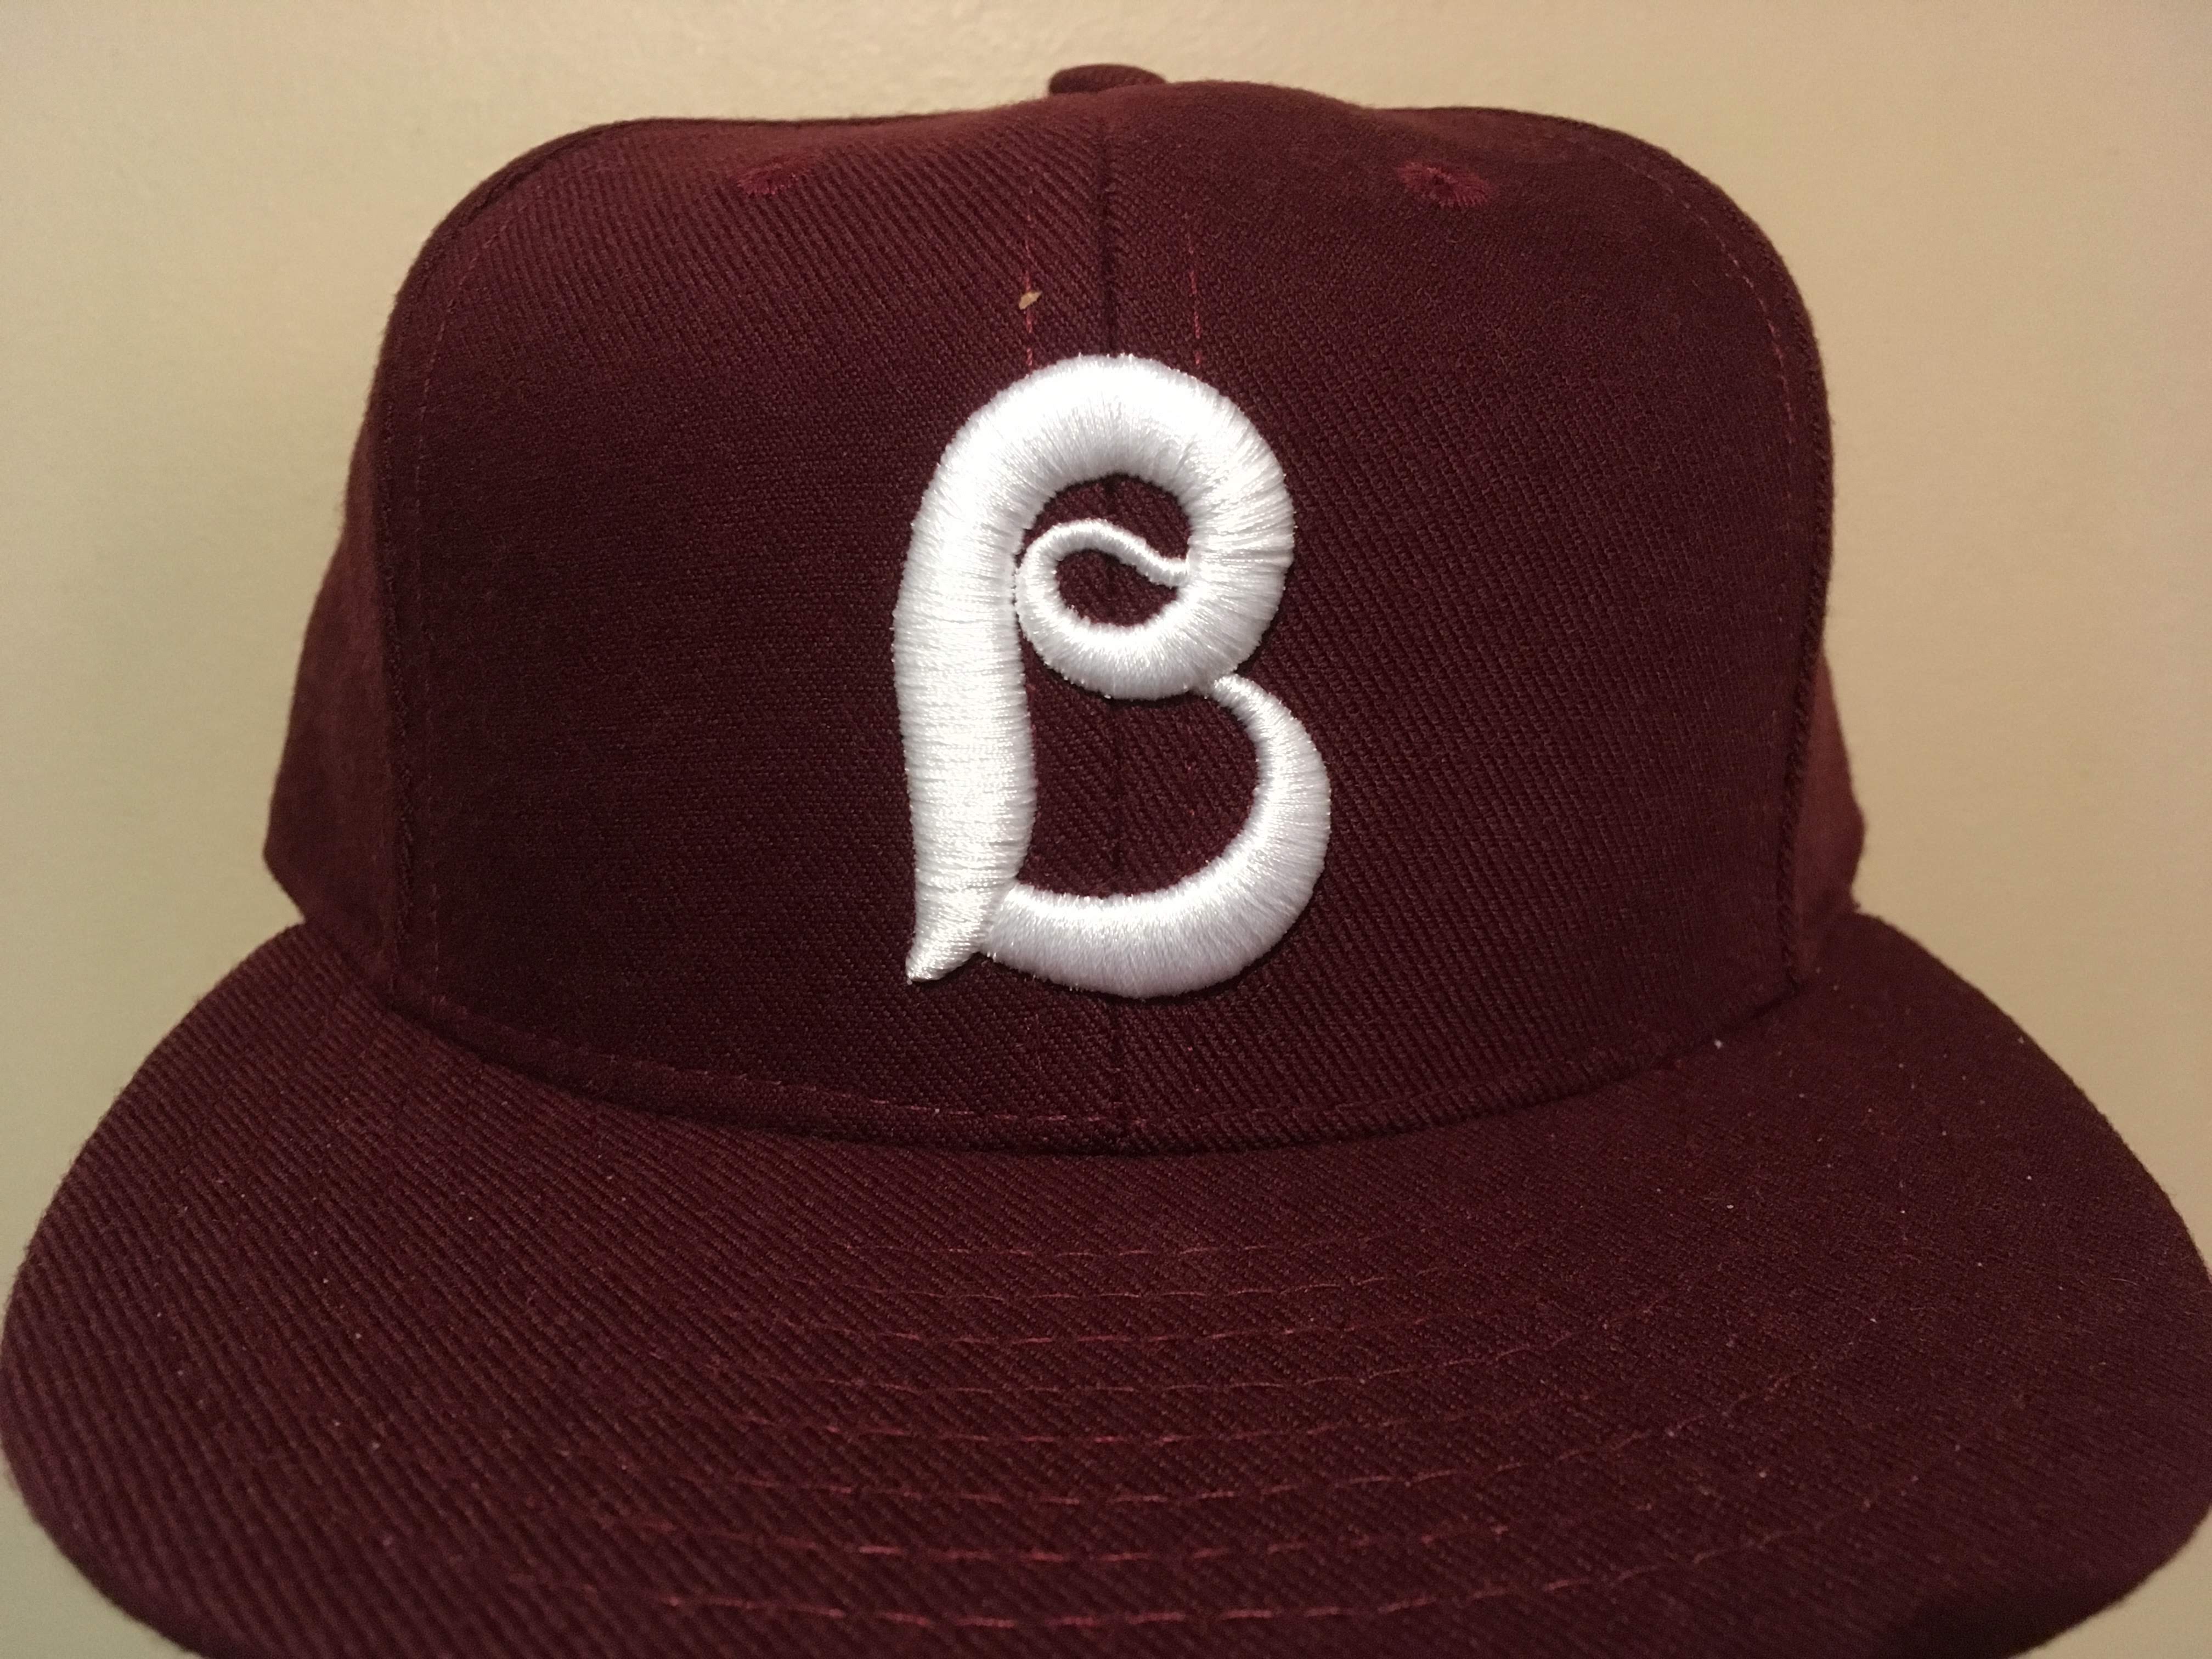 Baltimore Black Sox Hat - One Size Fits Most - Royal Retros